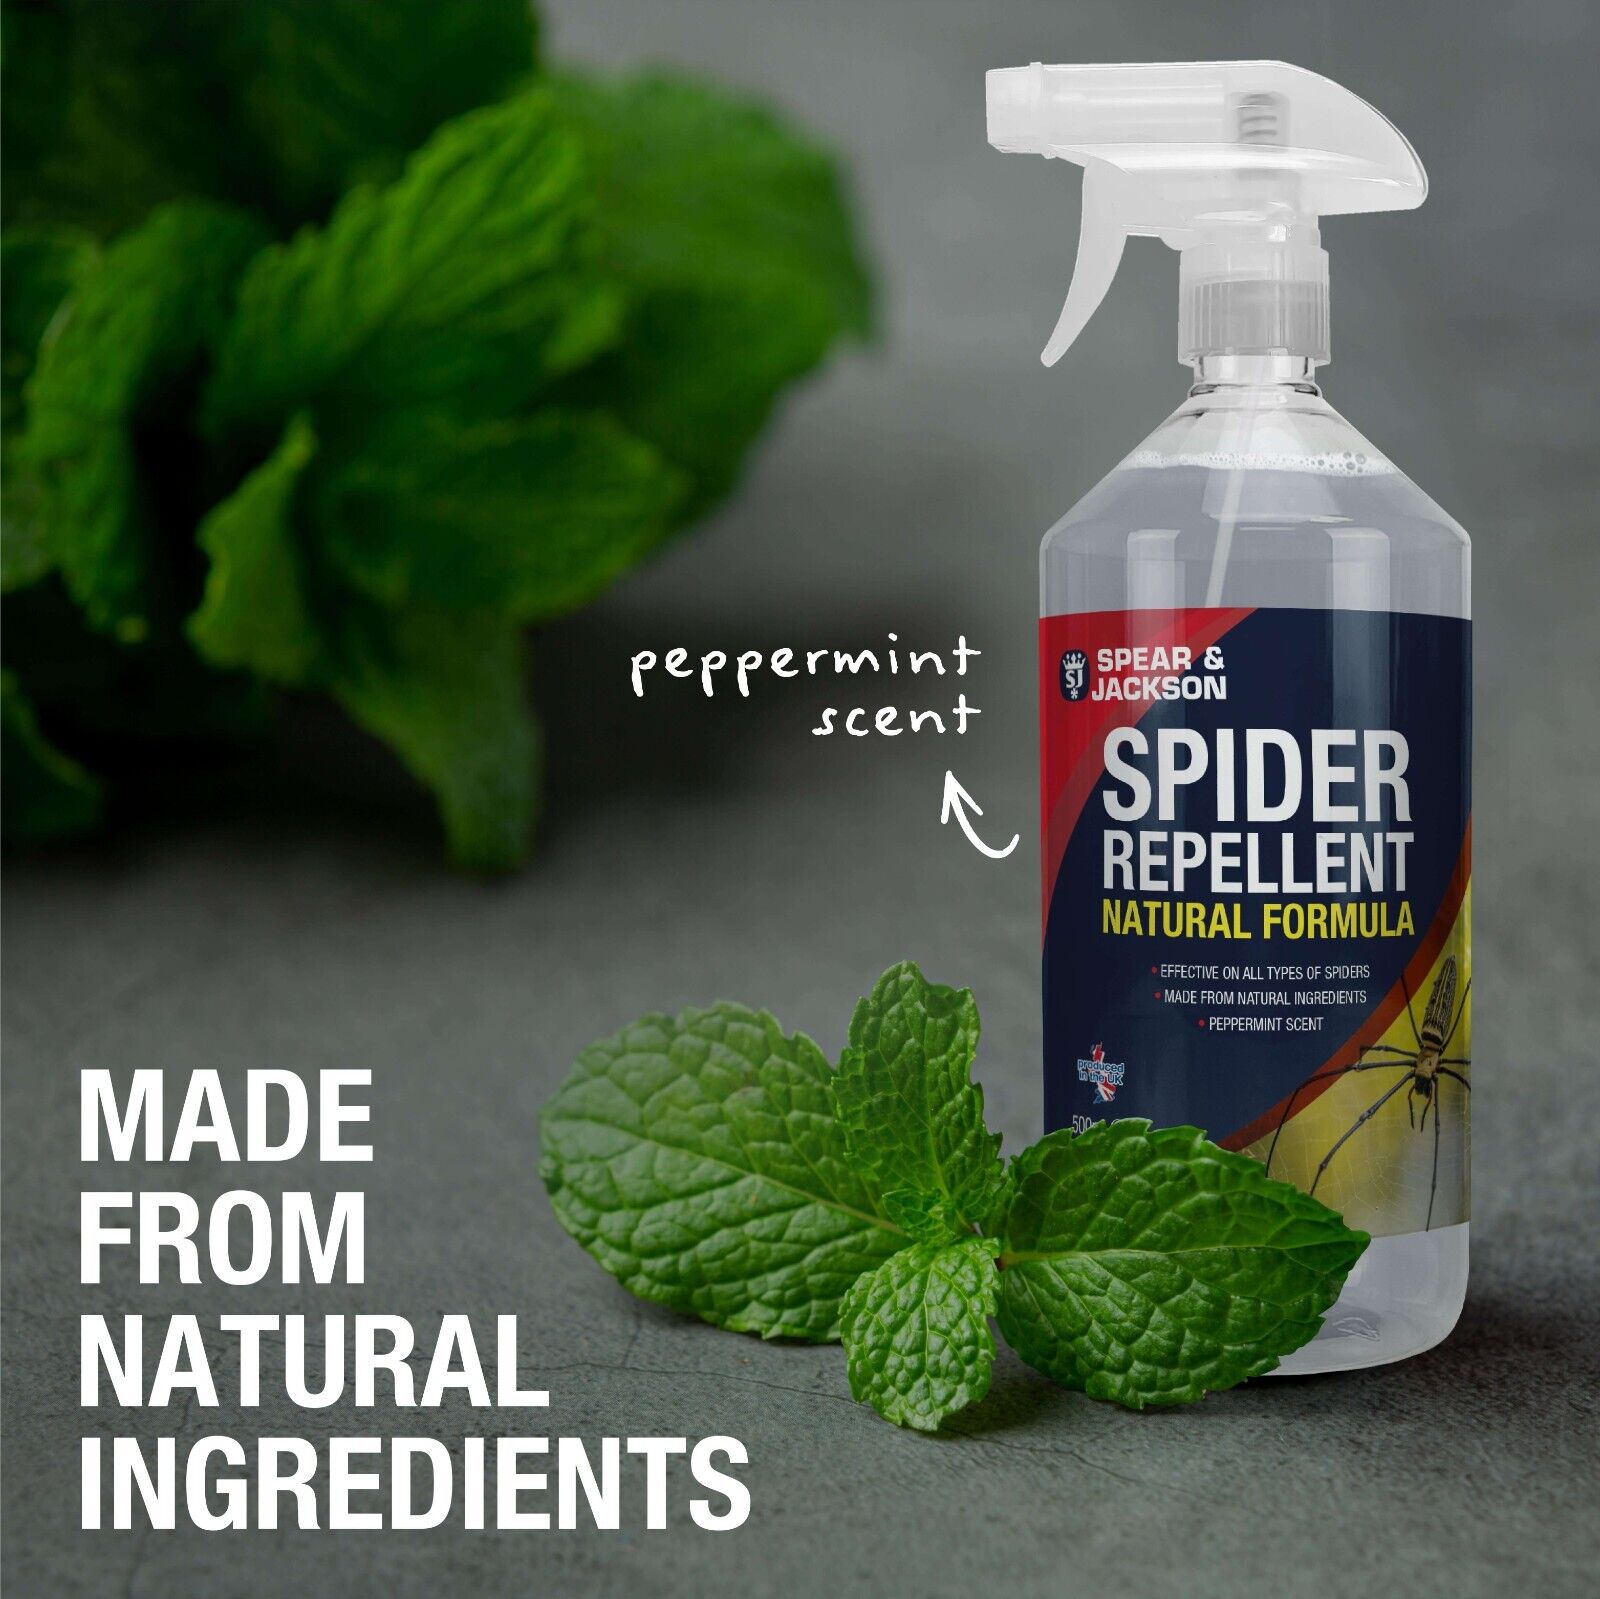 Spider Repellent 500ml Peppermint Scent Spear and Jackson